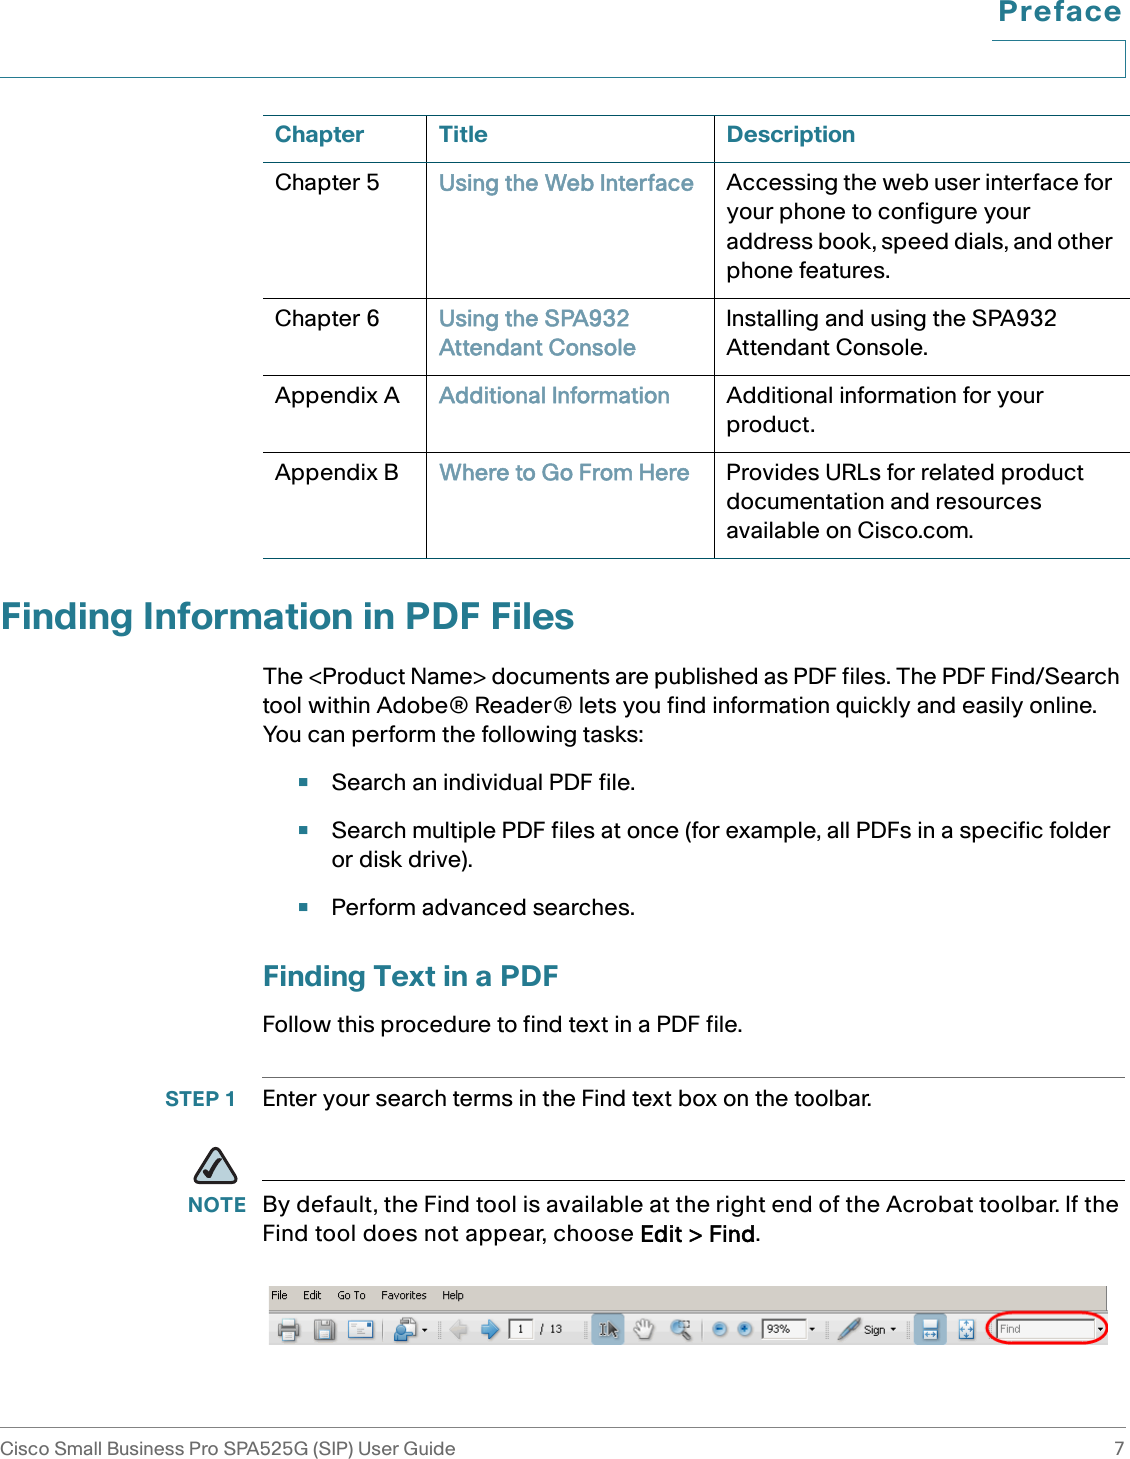 PrefaceCisco Small Business Pro SPA525G (SIP) User Guide 7 Finding Information in PDF FilesThe &lt;Product Name&gt; documents are published as PDF files. The PDF Find/Search tool within Adobe® Reader® lets you find information quickly and easily online. You can perform the following tasks:•Search an individual PDF file.•Search multiple PDF files at once (for example, all PDFs in a specific folder or disk drive).•Perform advanced searches.Finding Text in a PDFFollow this procedure to find text in a PDF file.STEP 1 Enter your search terms in the Find text box on the toolbar. NOTE By default, the Find tool is available at the right end of the Acrobat toolbar. If the Find tool does not appear, choose Edit &gt; Find. Chapter 5 Using the Web Interface Accessing the web user interface for your phone to configure your address book, speed dials, and other phone features.Chapter 6 Using the SPA932 Attendant ConsoleInstalling and using the SPA932 Attendant Console.Appendix A Additional Information Additional information for your product.Appendix B Where to Go From Here Provides URLs for related product documentation and resources available on Cisco.com.Chapter Title Description